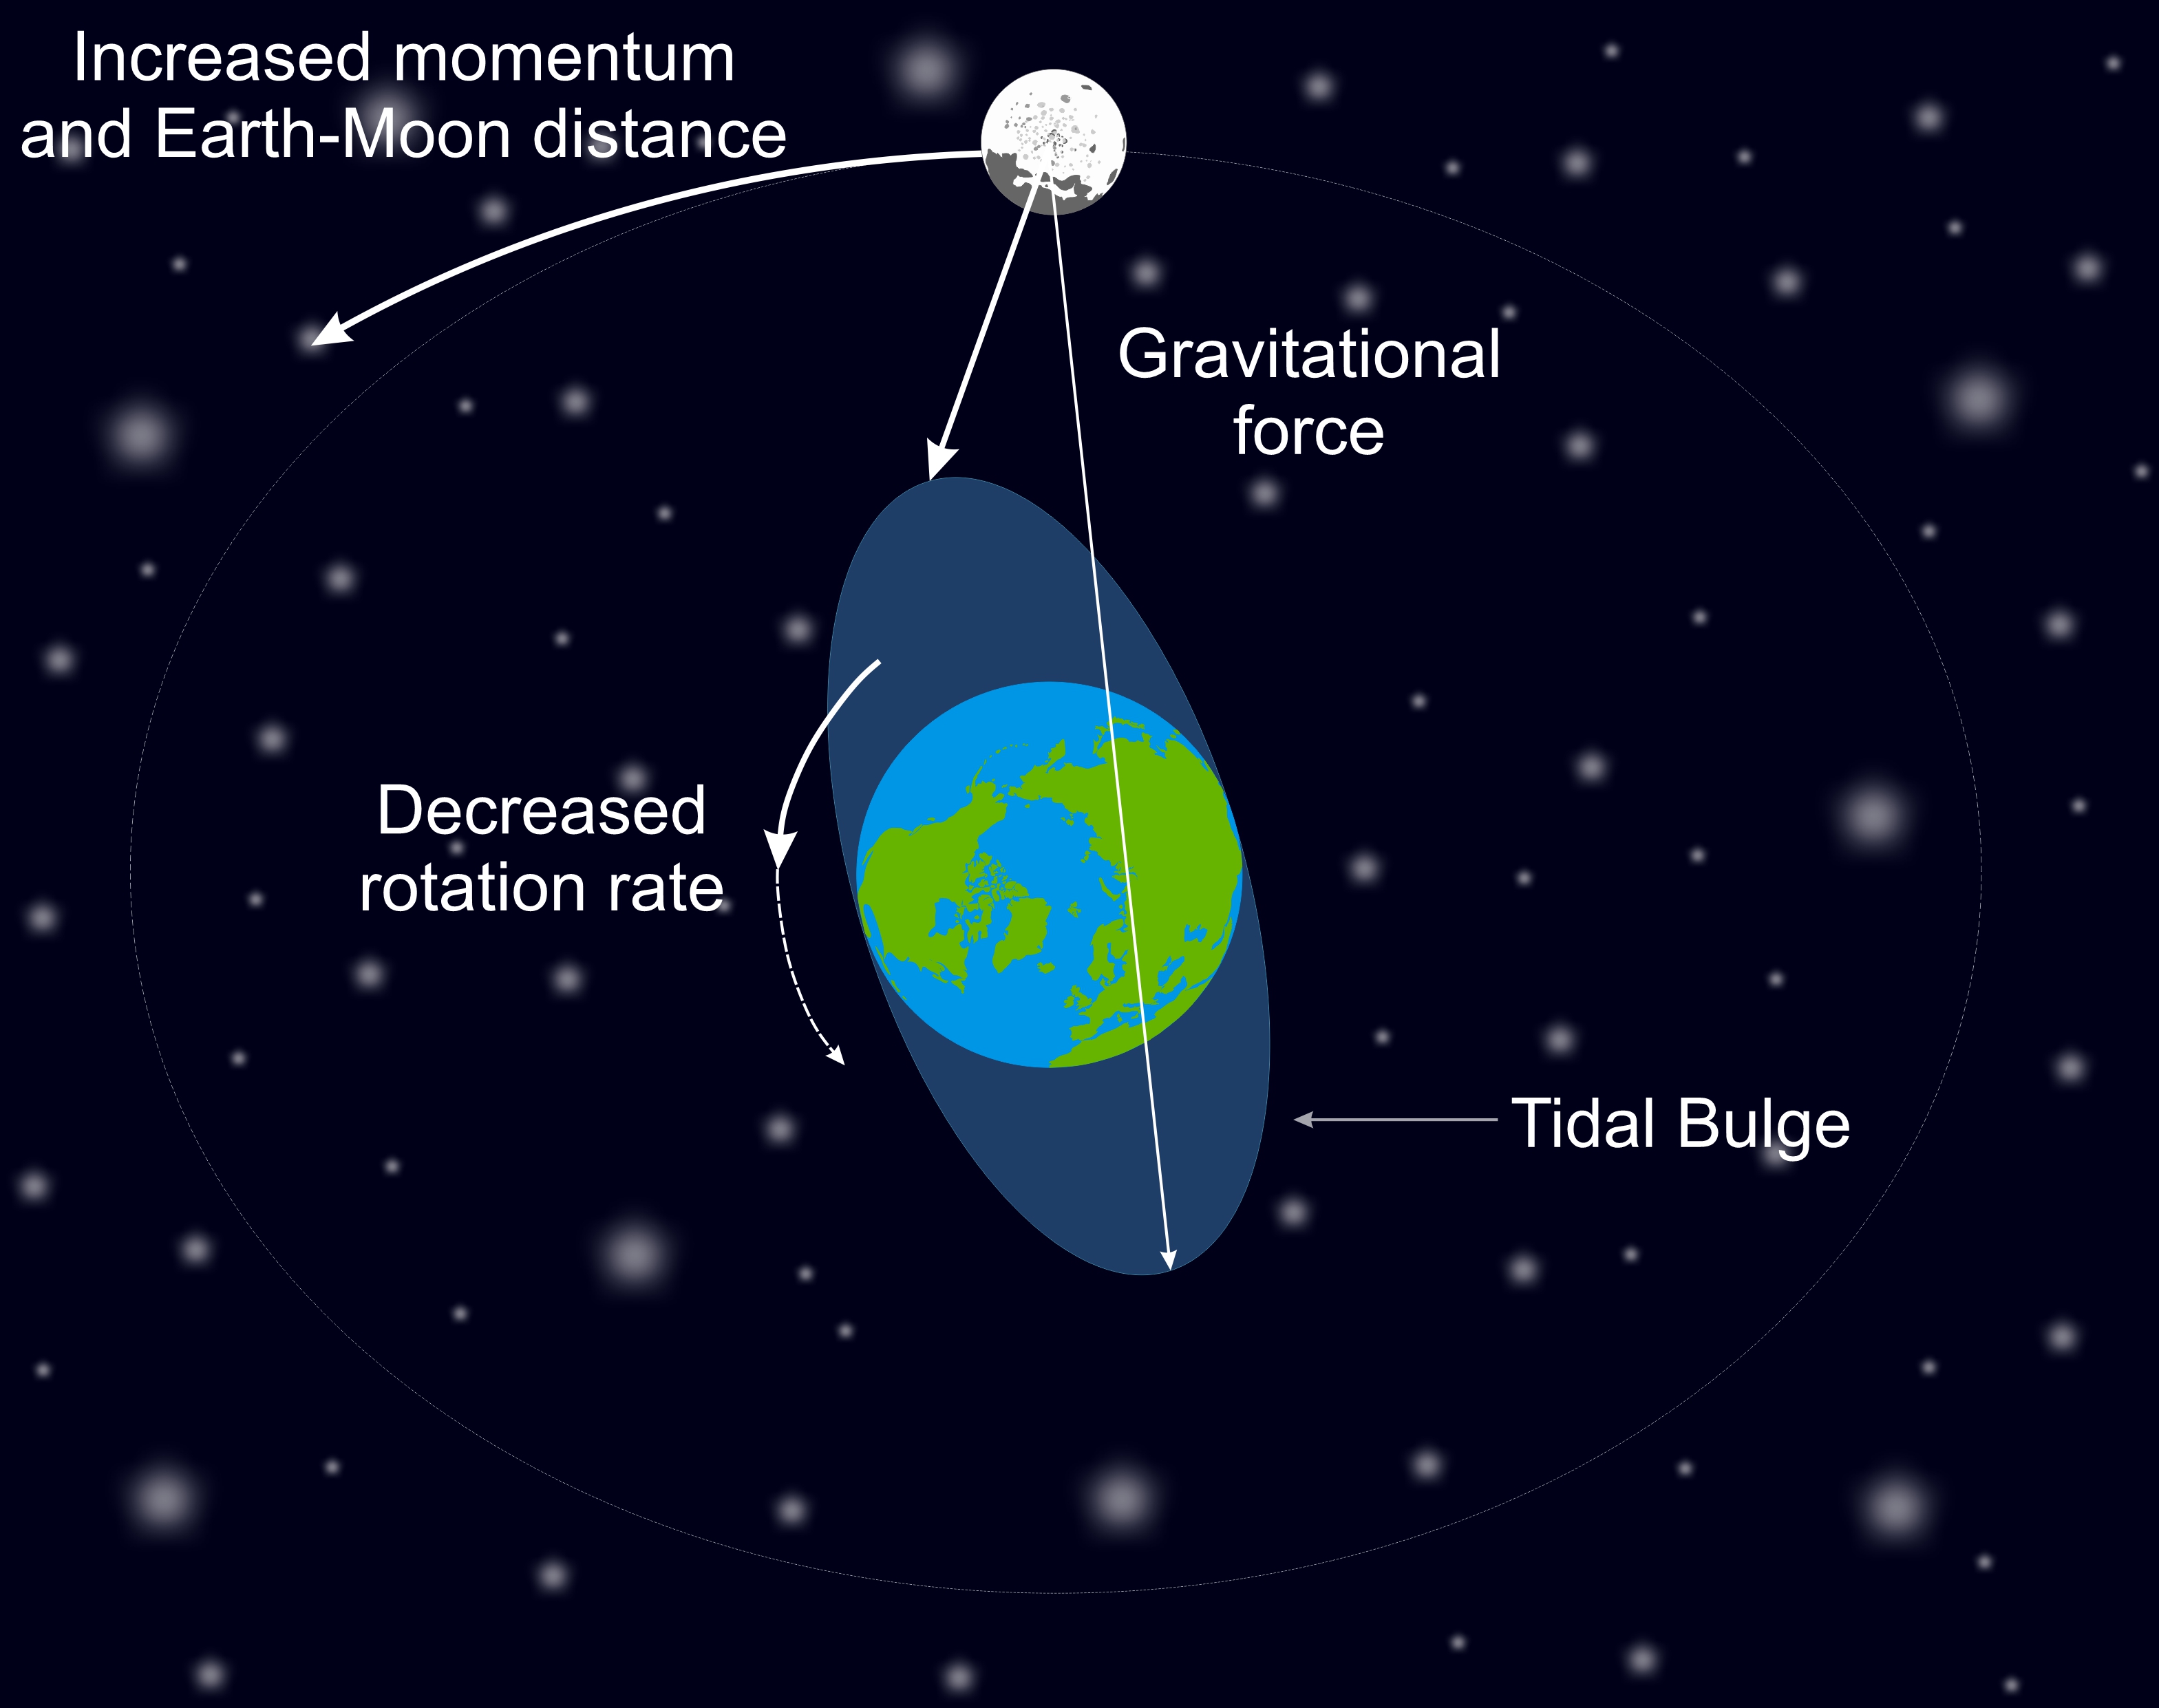 Because the tidal bulge is delayed by friction, and a day is shorter than a month, the tidal bulge is positioned ahead of the Moon. This creates a torque that increases the Moon’s momentum and decreases the rate of Earth’s rotation, thus making days increasingly longer